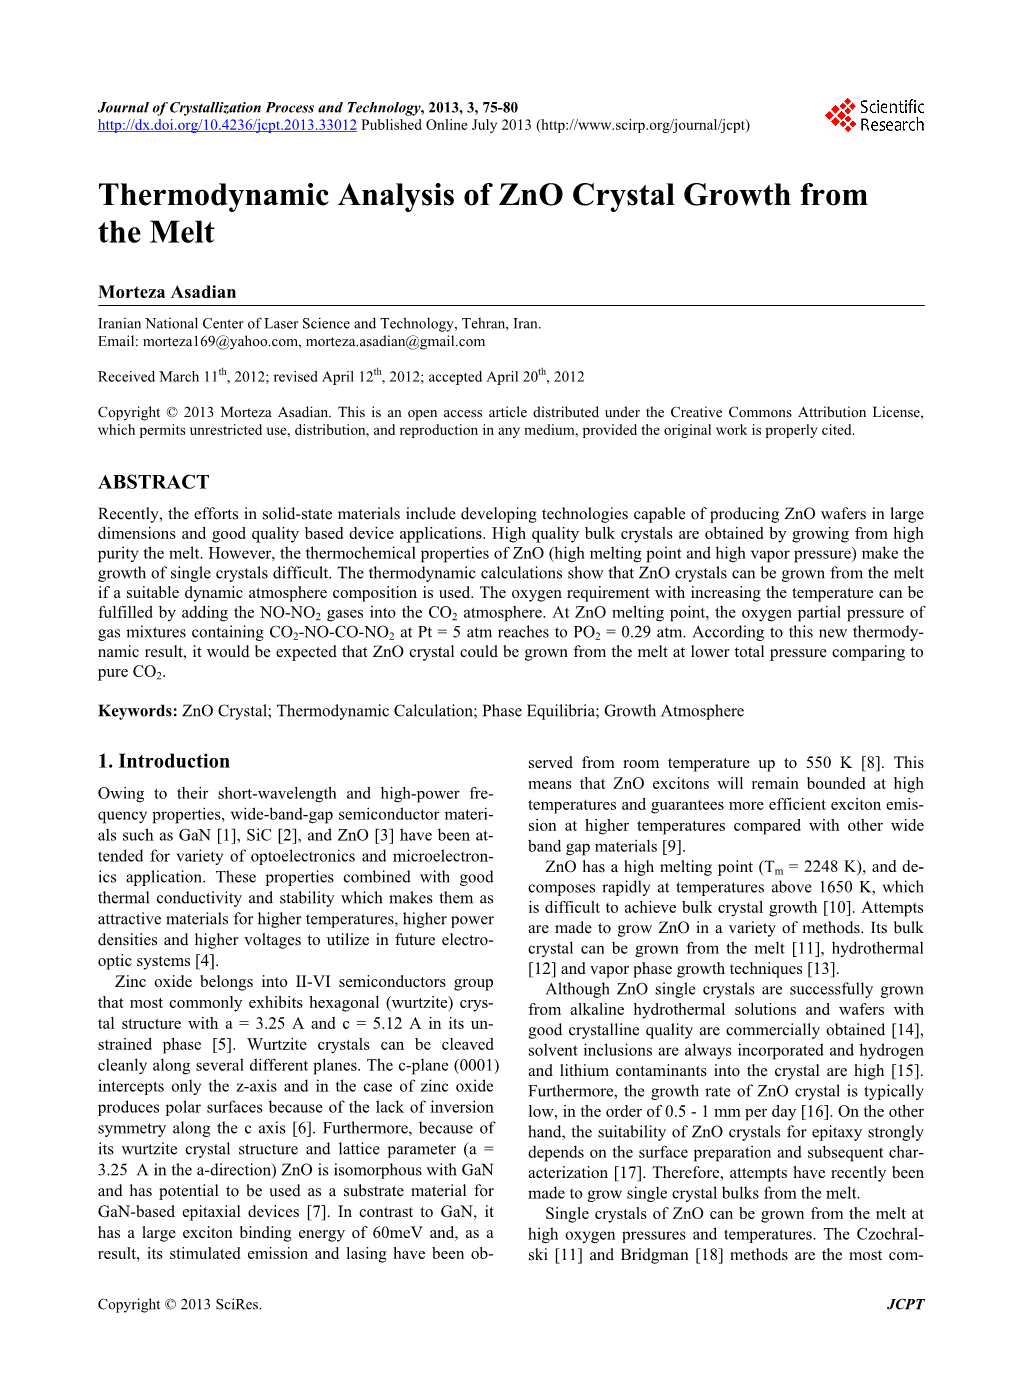 Thermodynamic Analysis of Zno Crystal Growth from the Melt